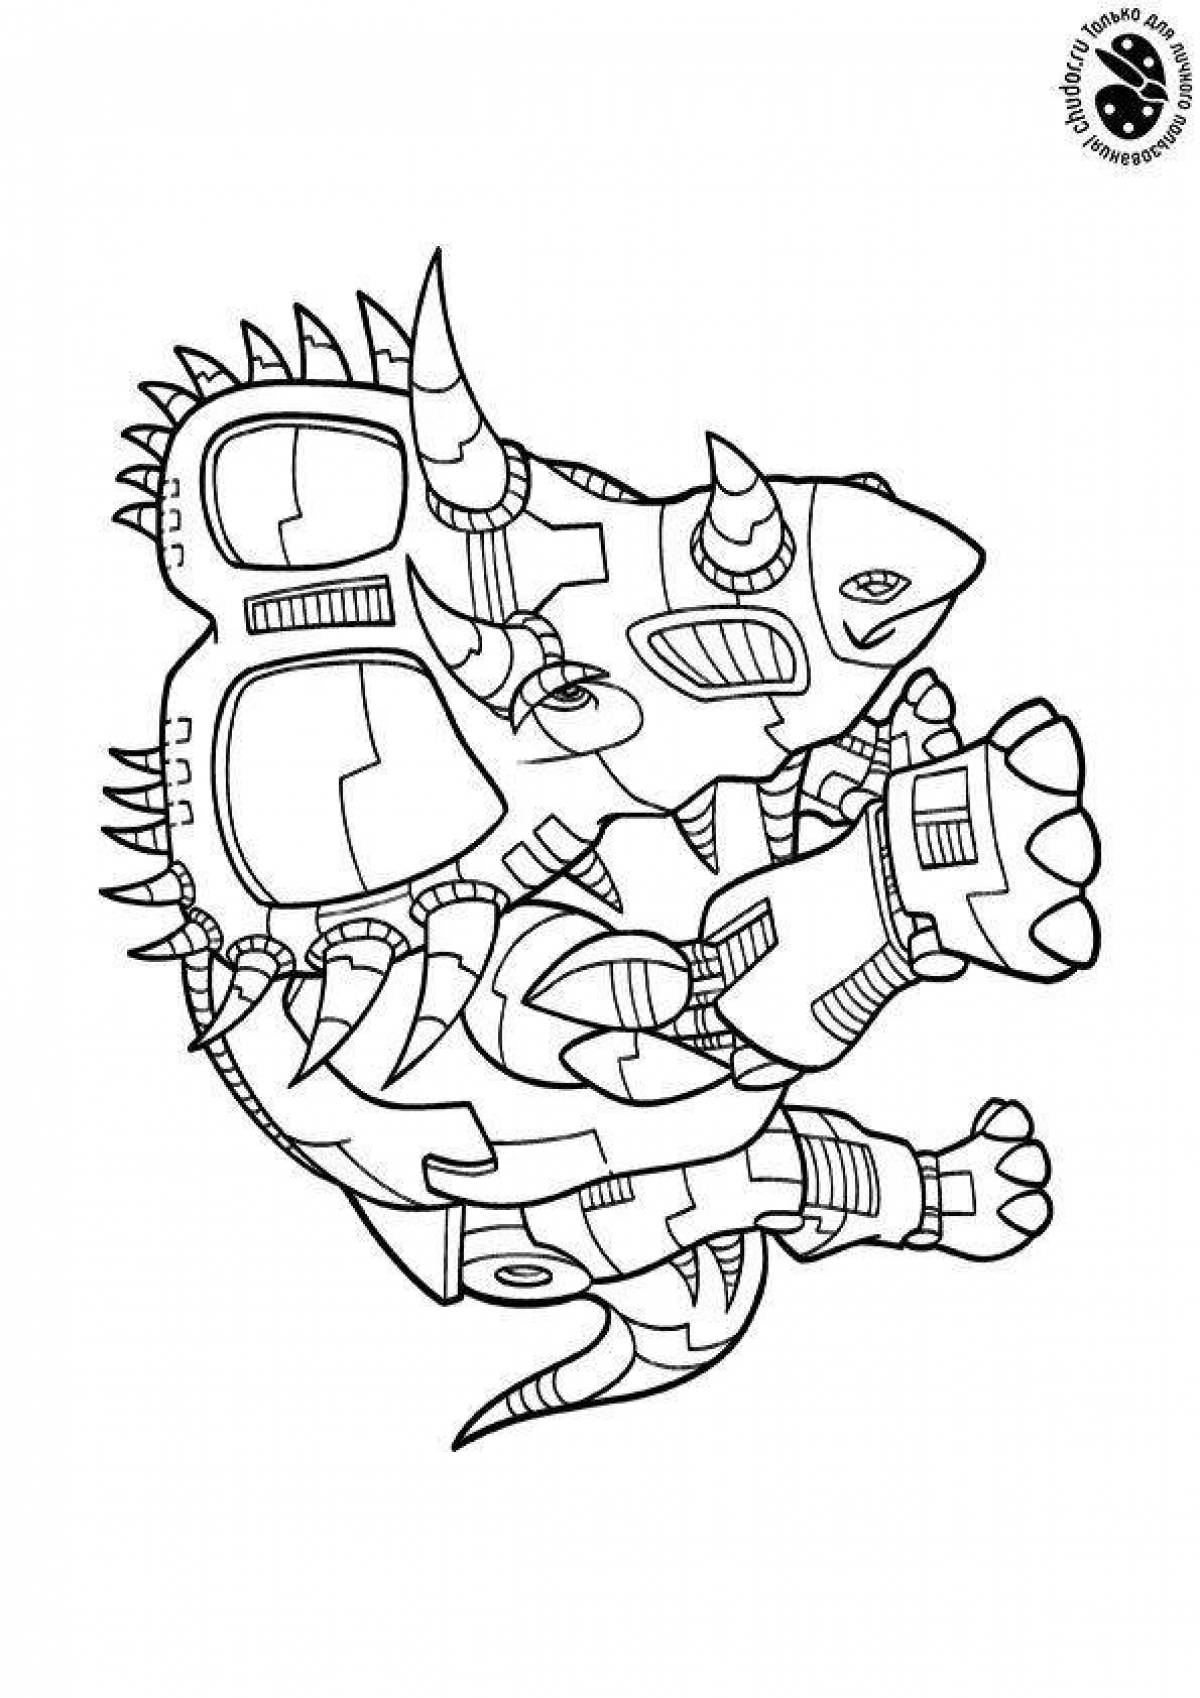 Colorful robot dinosaur coloring page